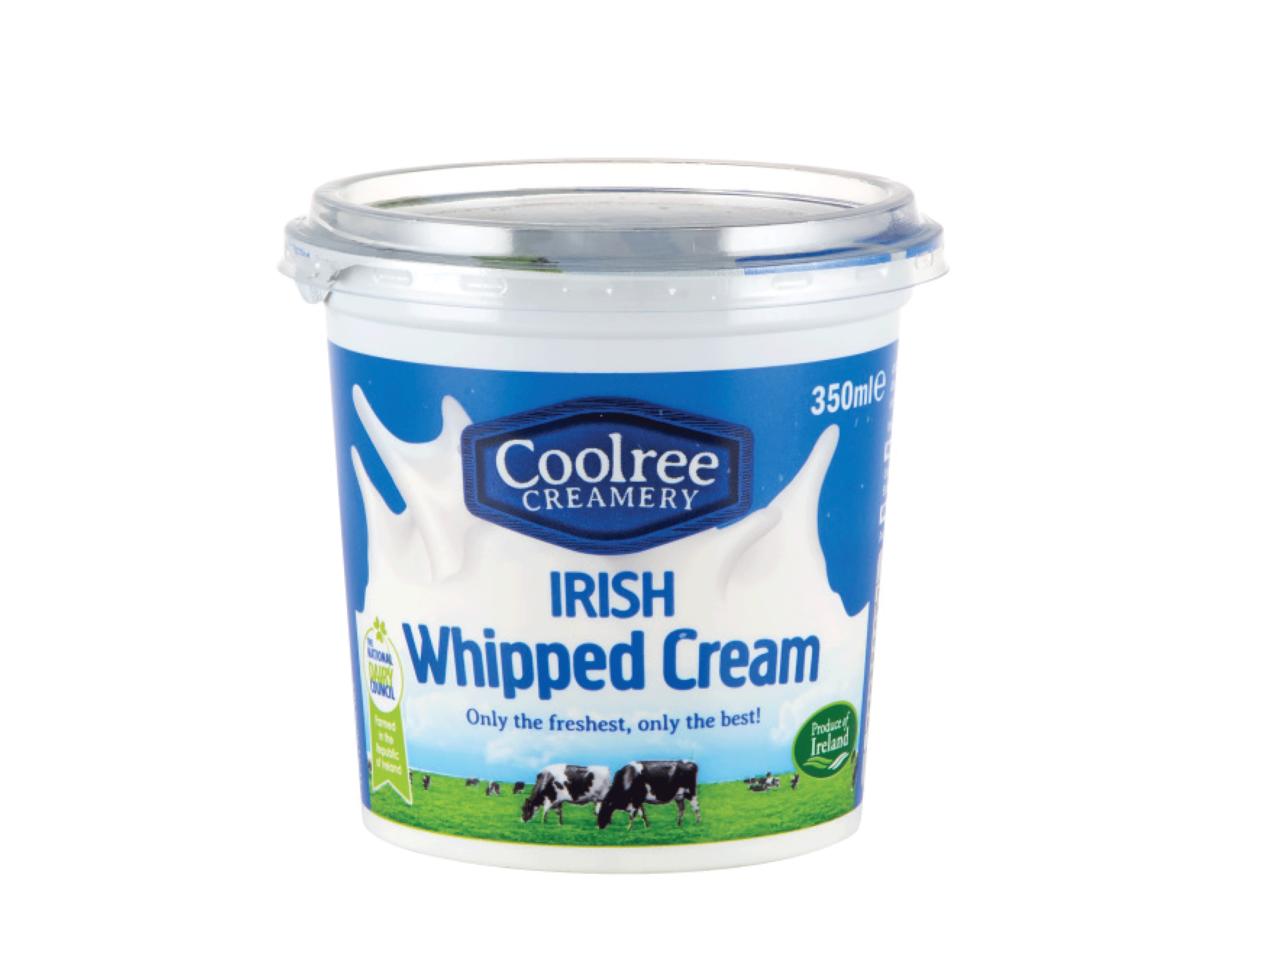 COOLREE CREAMERY(R) Whipped Cream